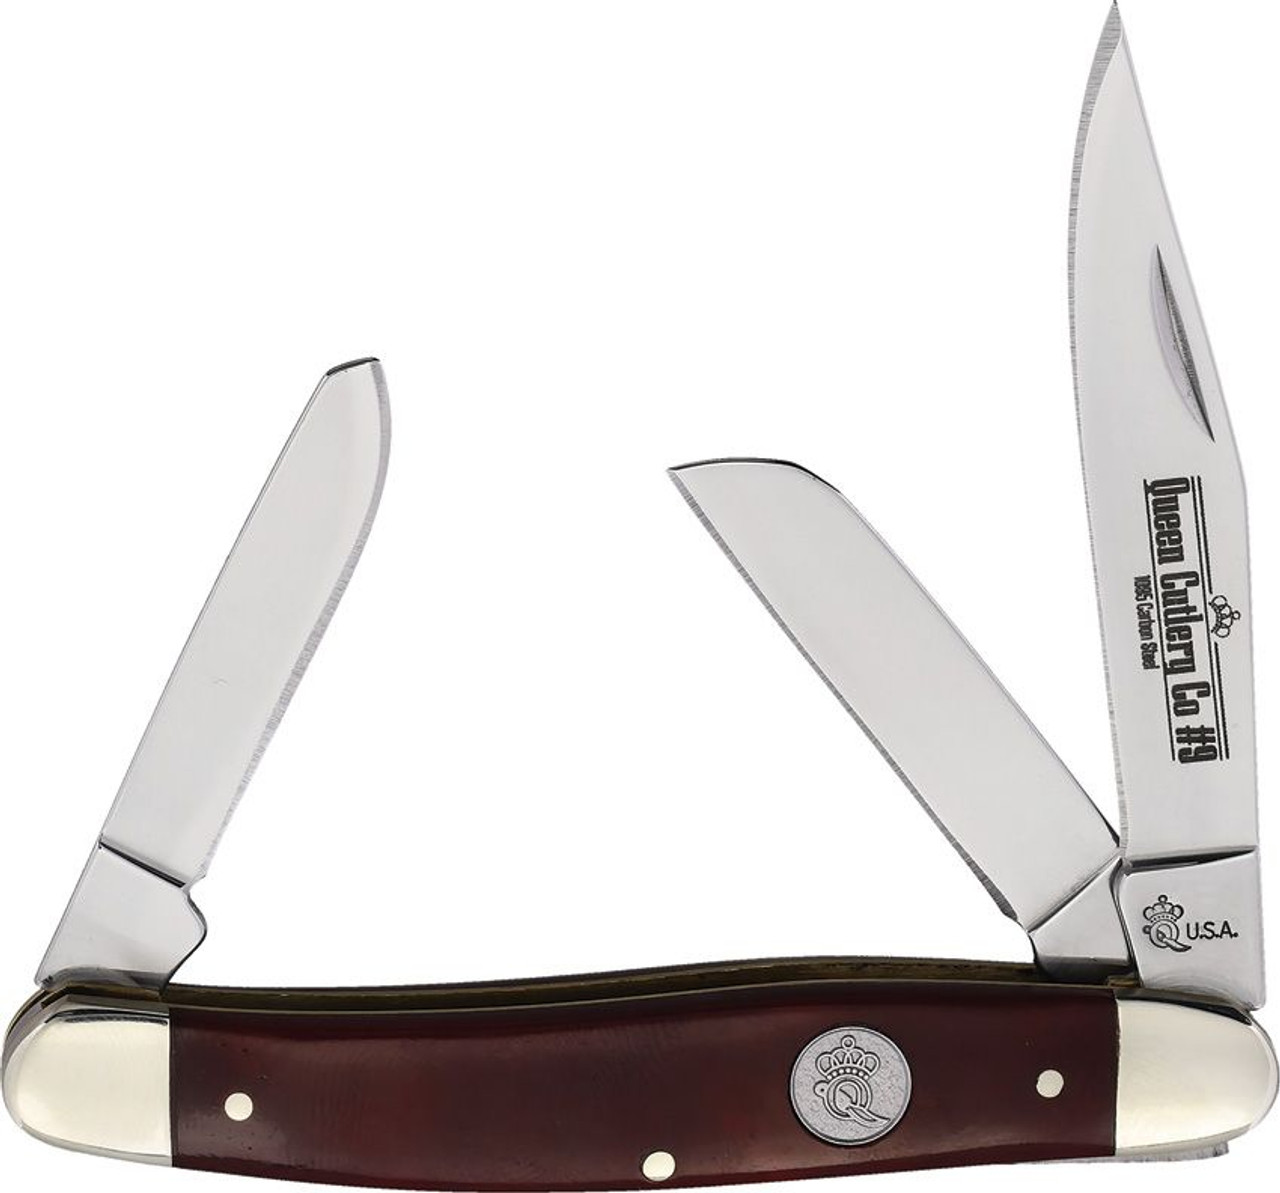 Queen Cutlery Medium Stockman (QRSB47) - Mirror Polish 1095 Carbon Steel Clip, Sheepsfoot, and Spey Blades, Red Smooth Bone Handle